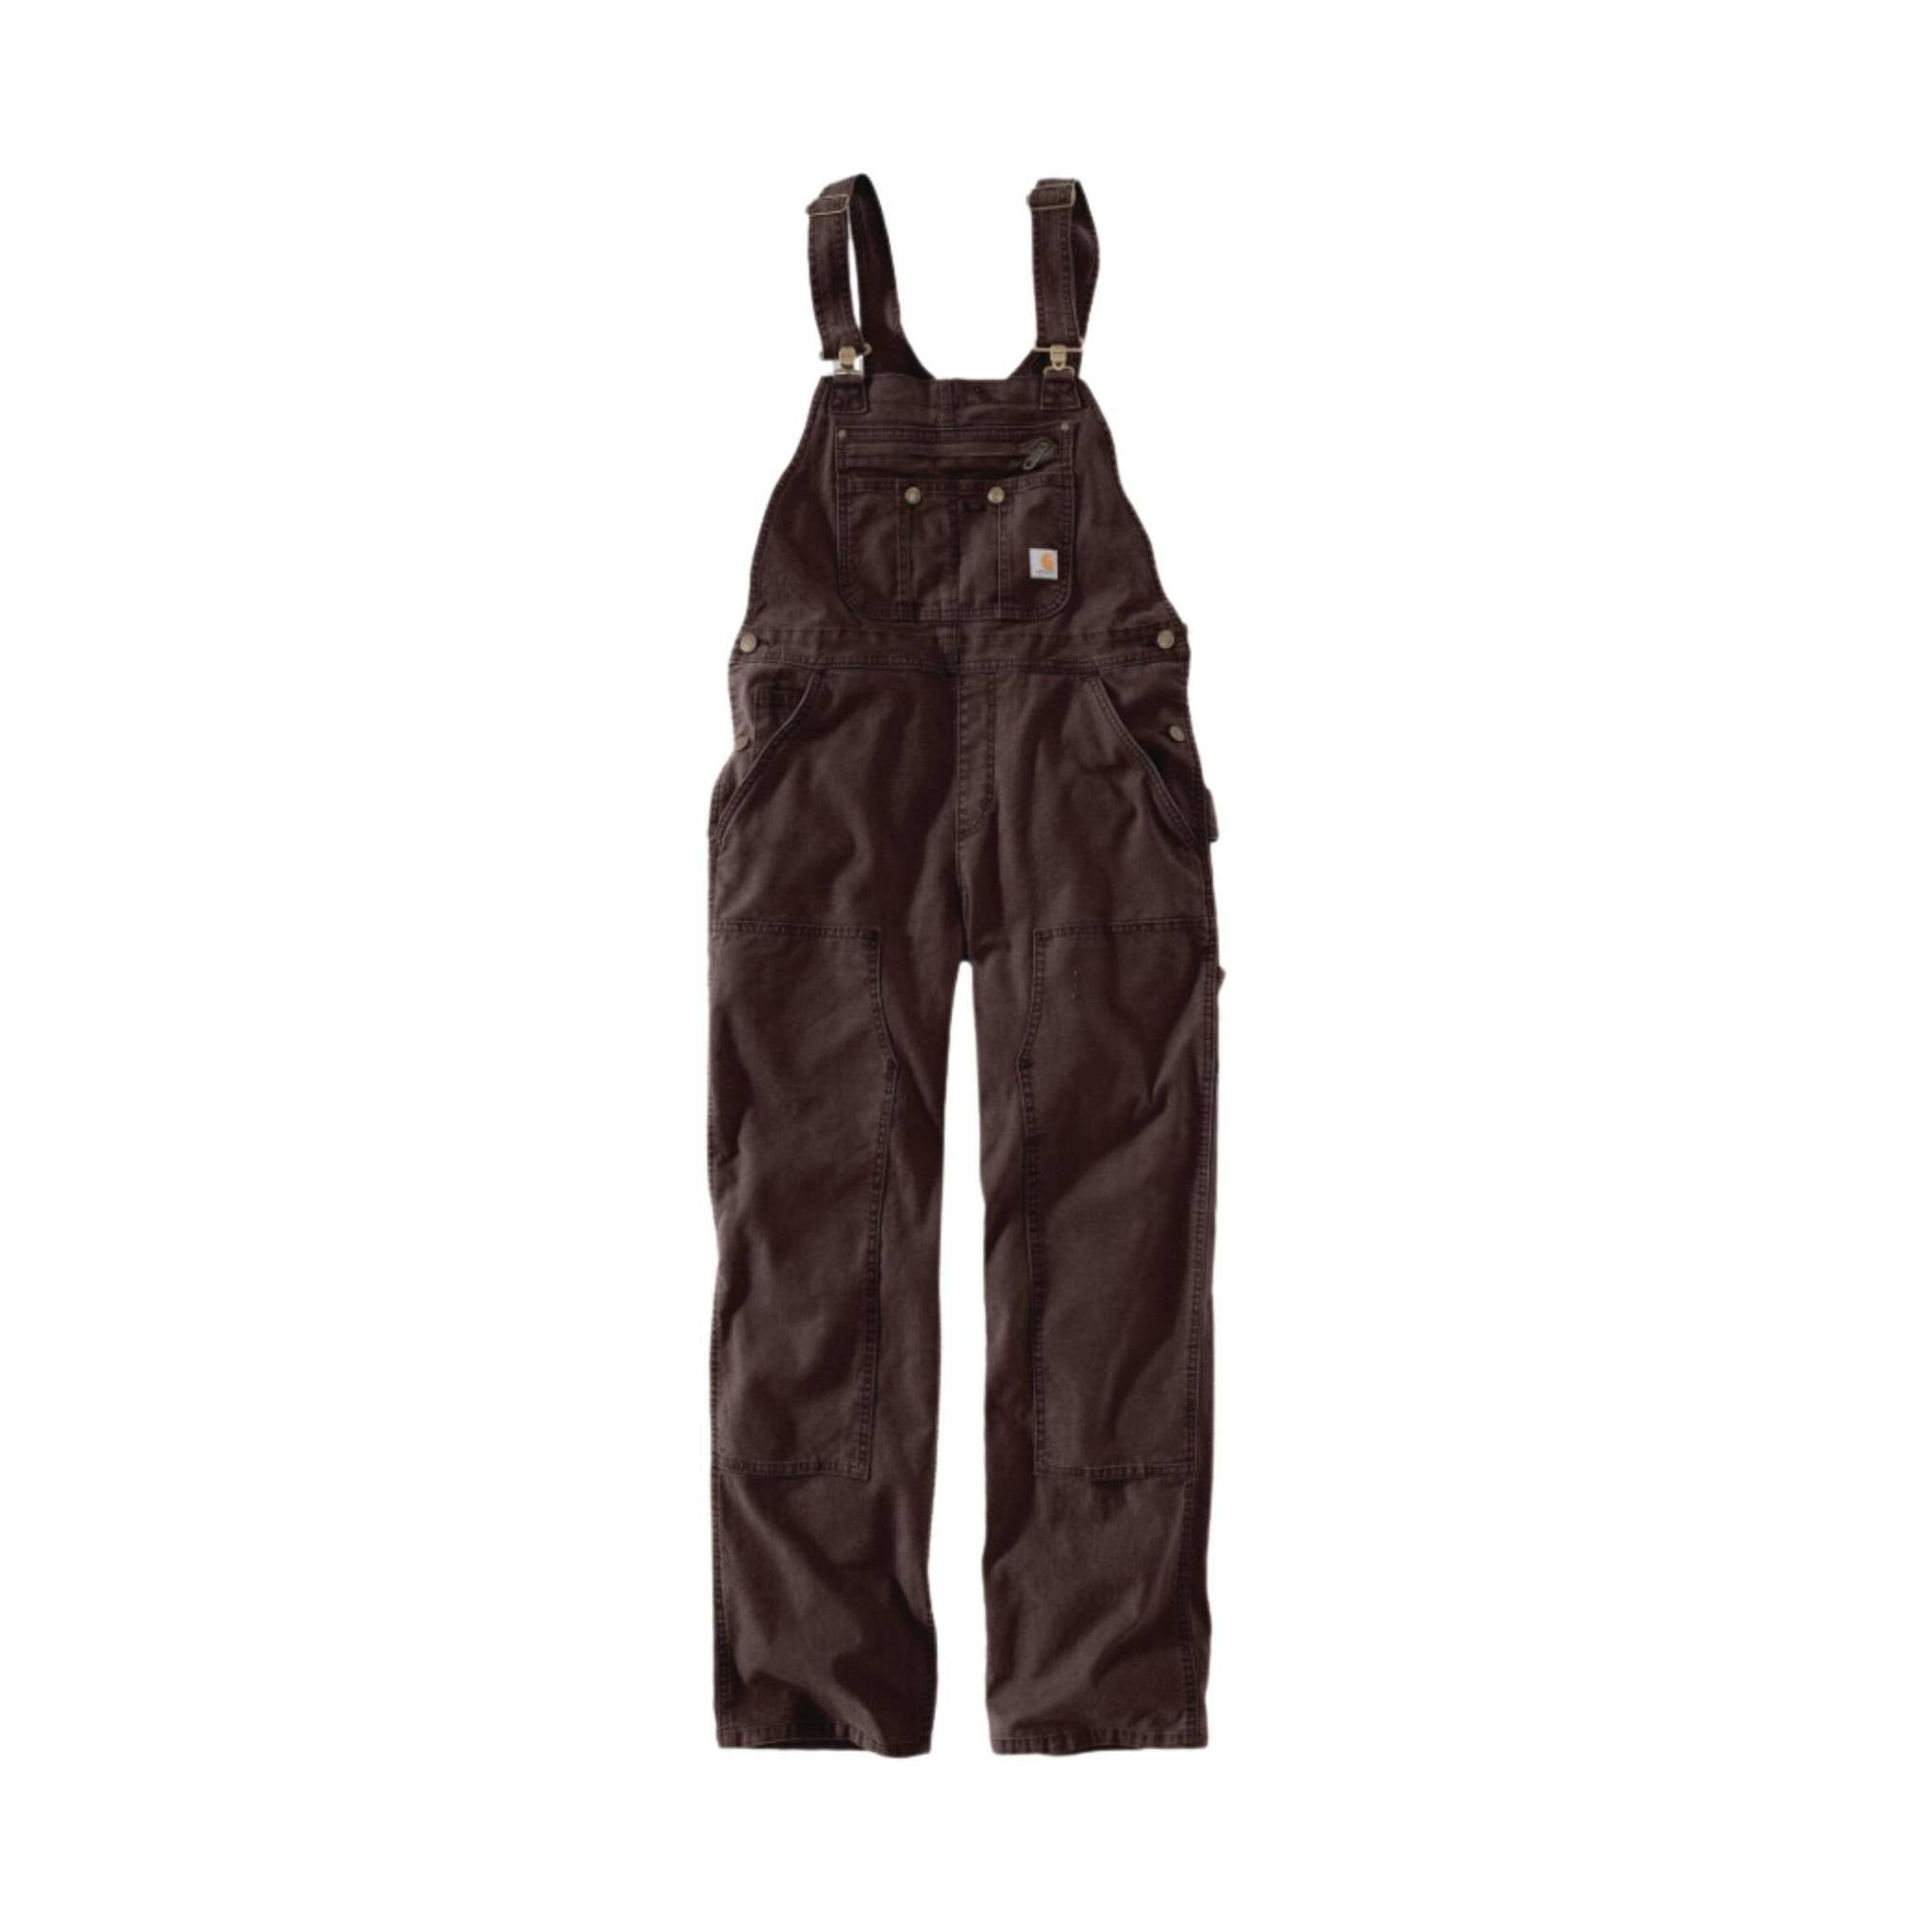 Carhartt Women's Rugged Flex Loose Fit Double Front Canvas Bib Overalls